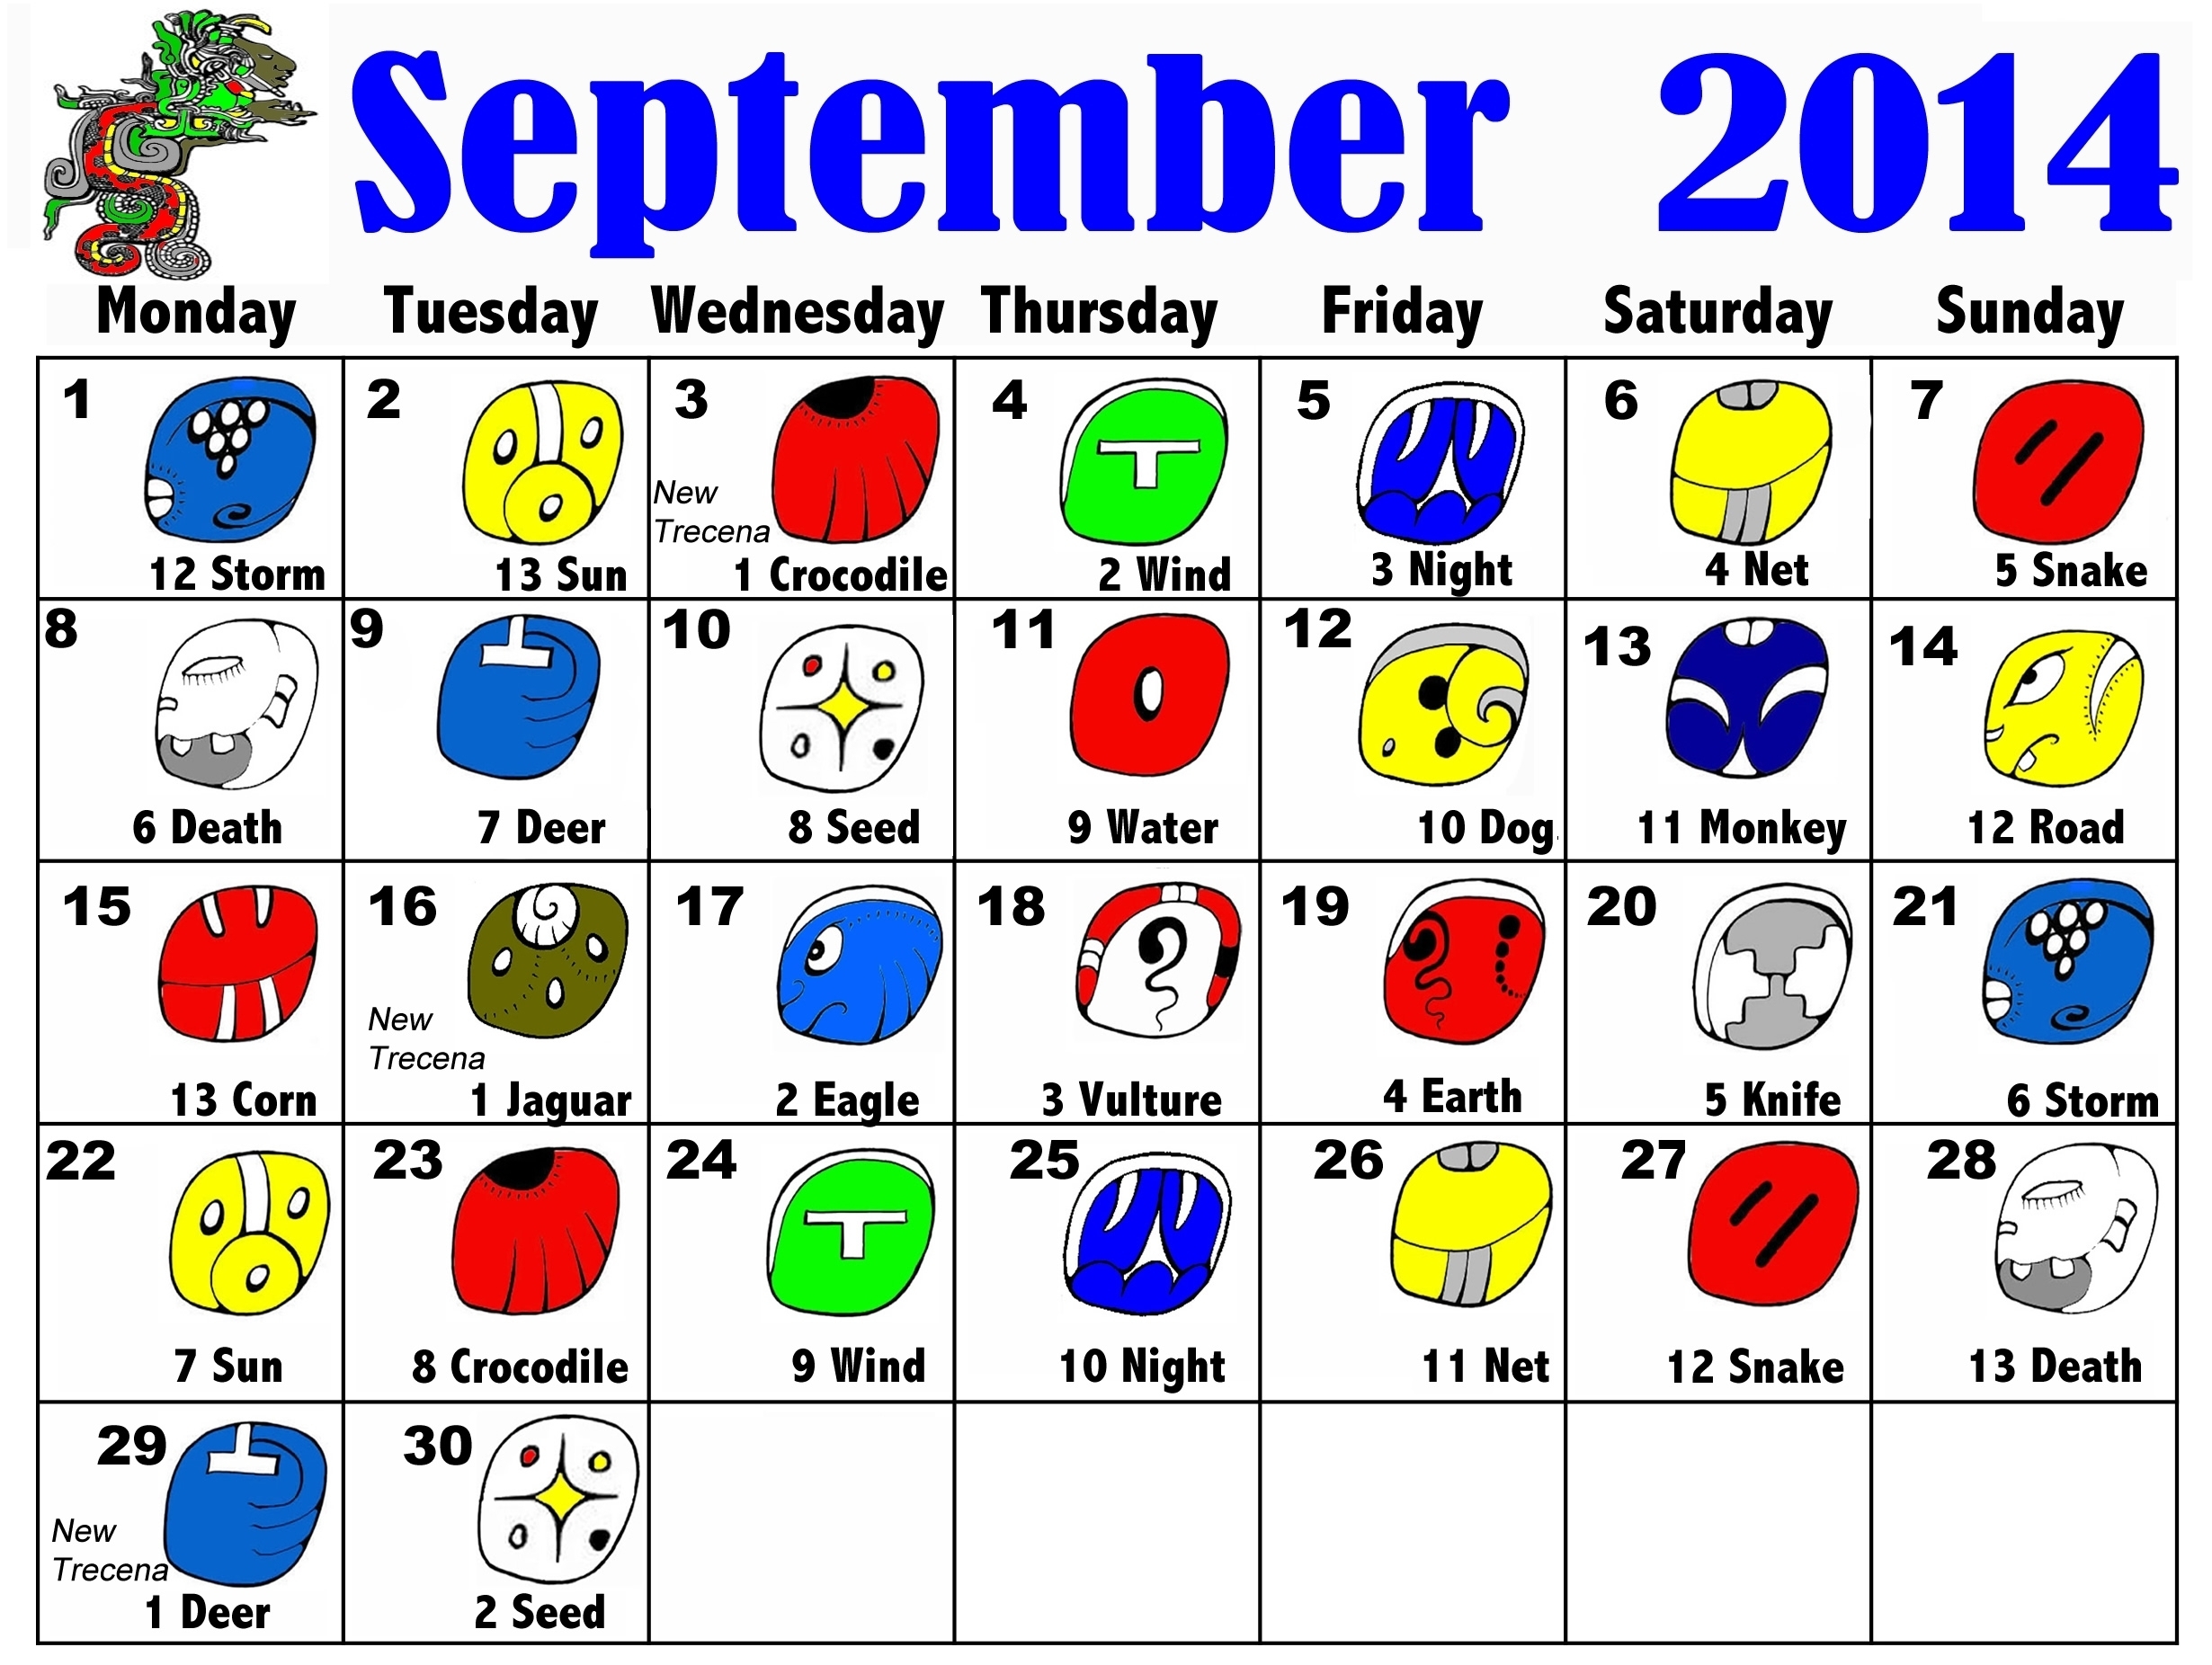 Find The Mayan Day Sign For Every Day In September 2014 With